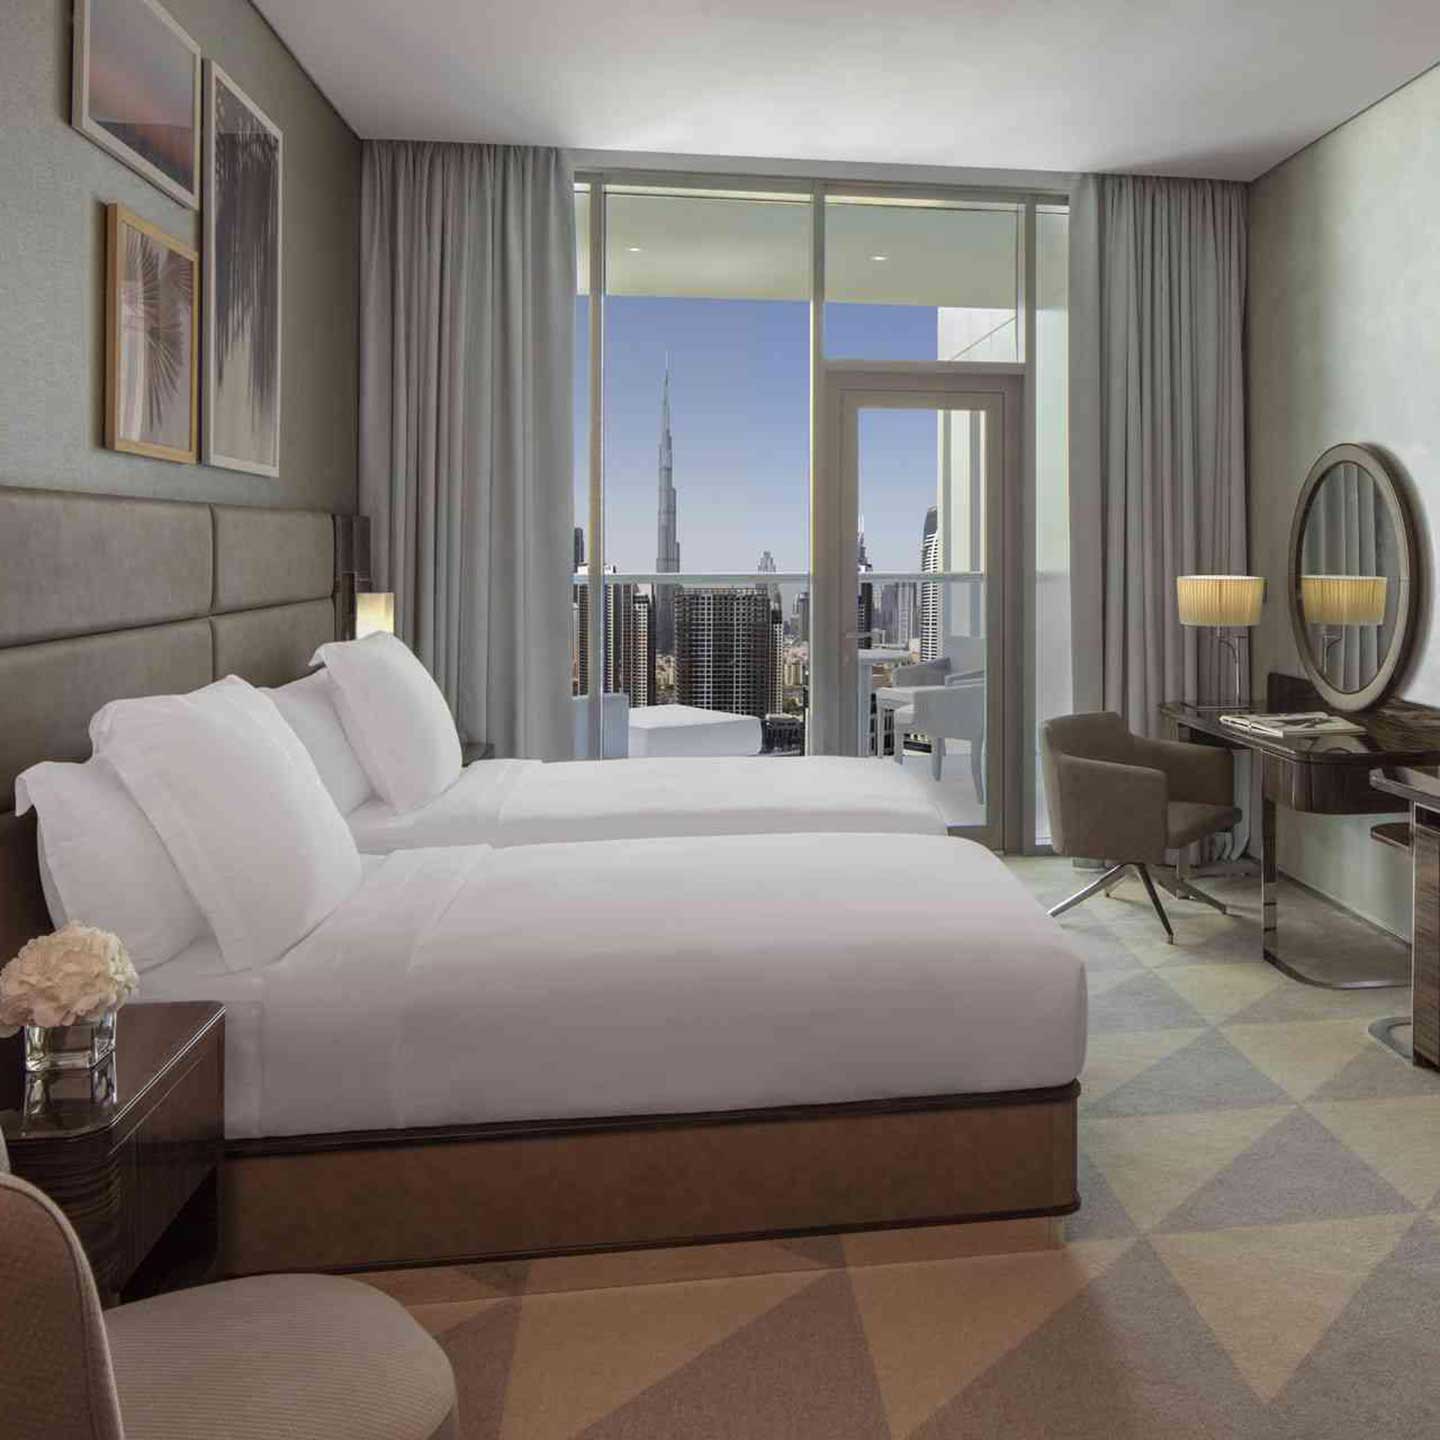 A king bed at the centre, with a console table and mirror to the right, with a background view of the balcony which shows Dubai city views with Burj Khalifa building